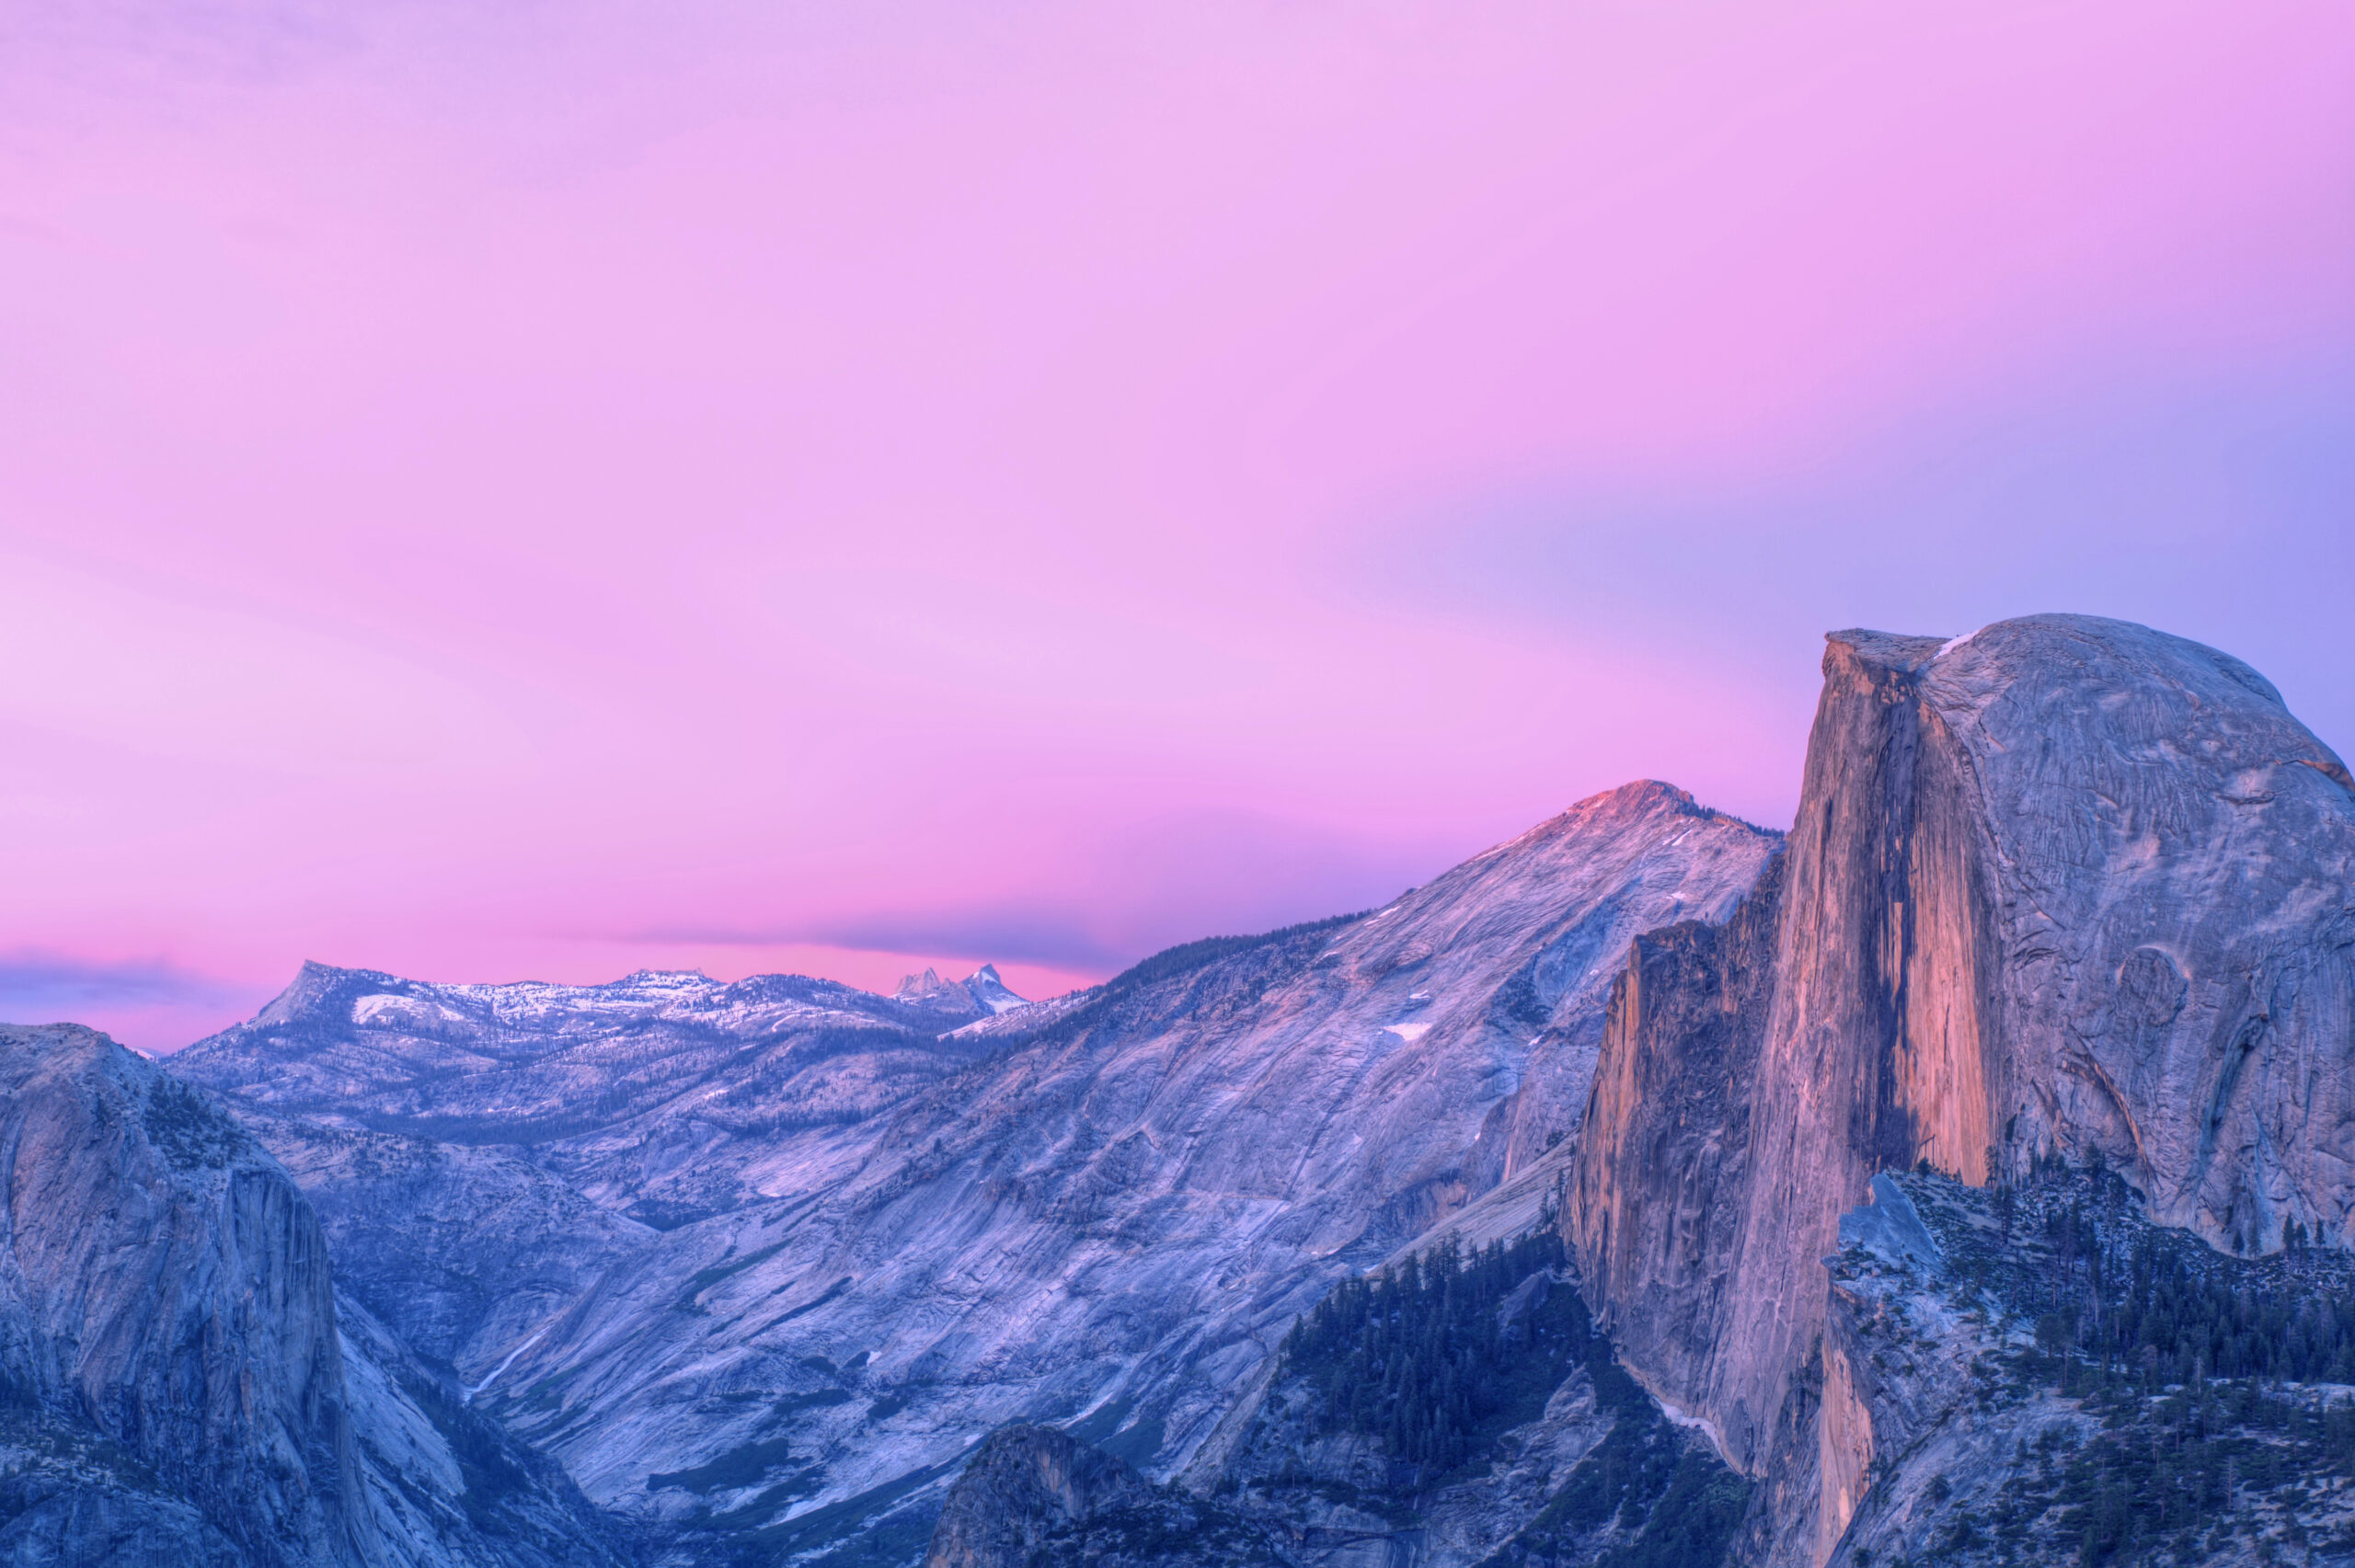 Yosemite National Park scenic view with pink hue in sky.